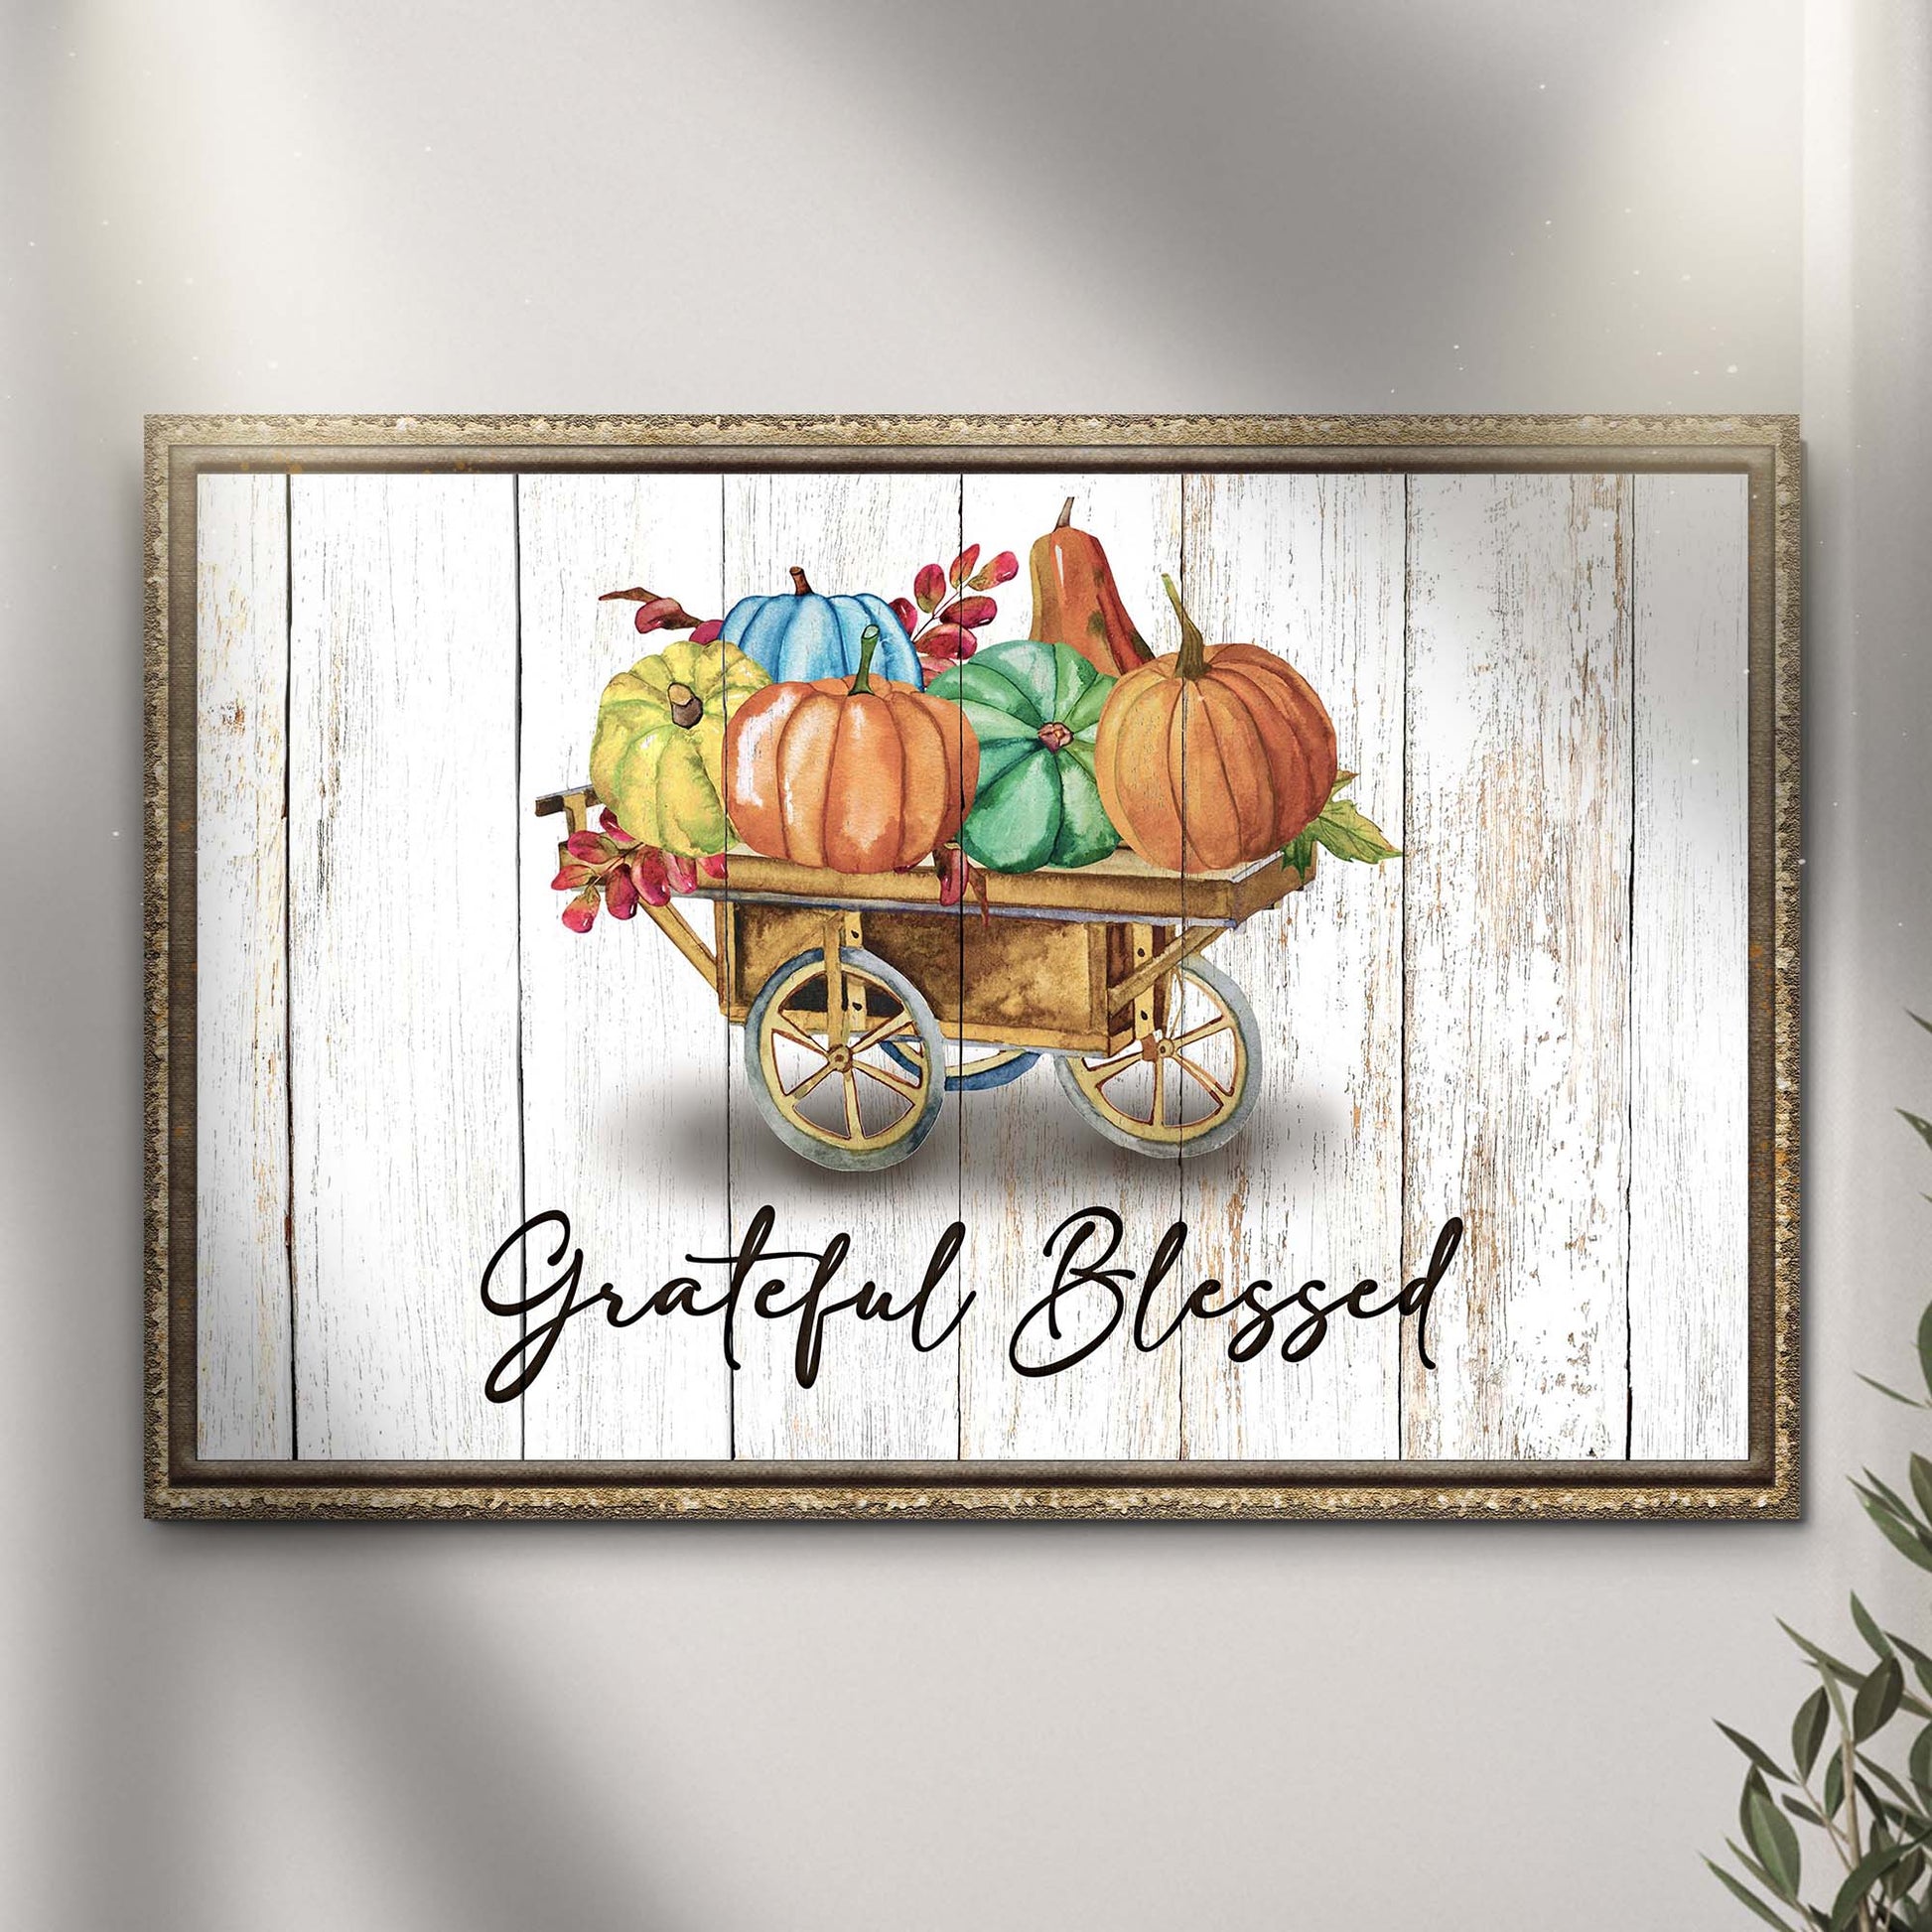 Grateful Blessed Thanksgiving Sign - Image by Tailored Canvases